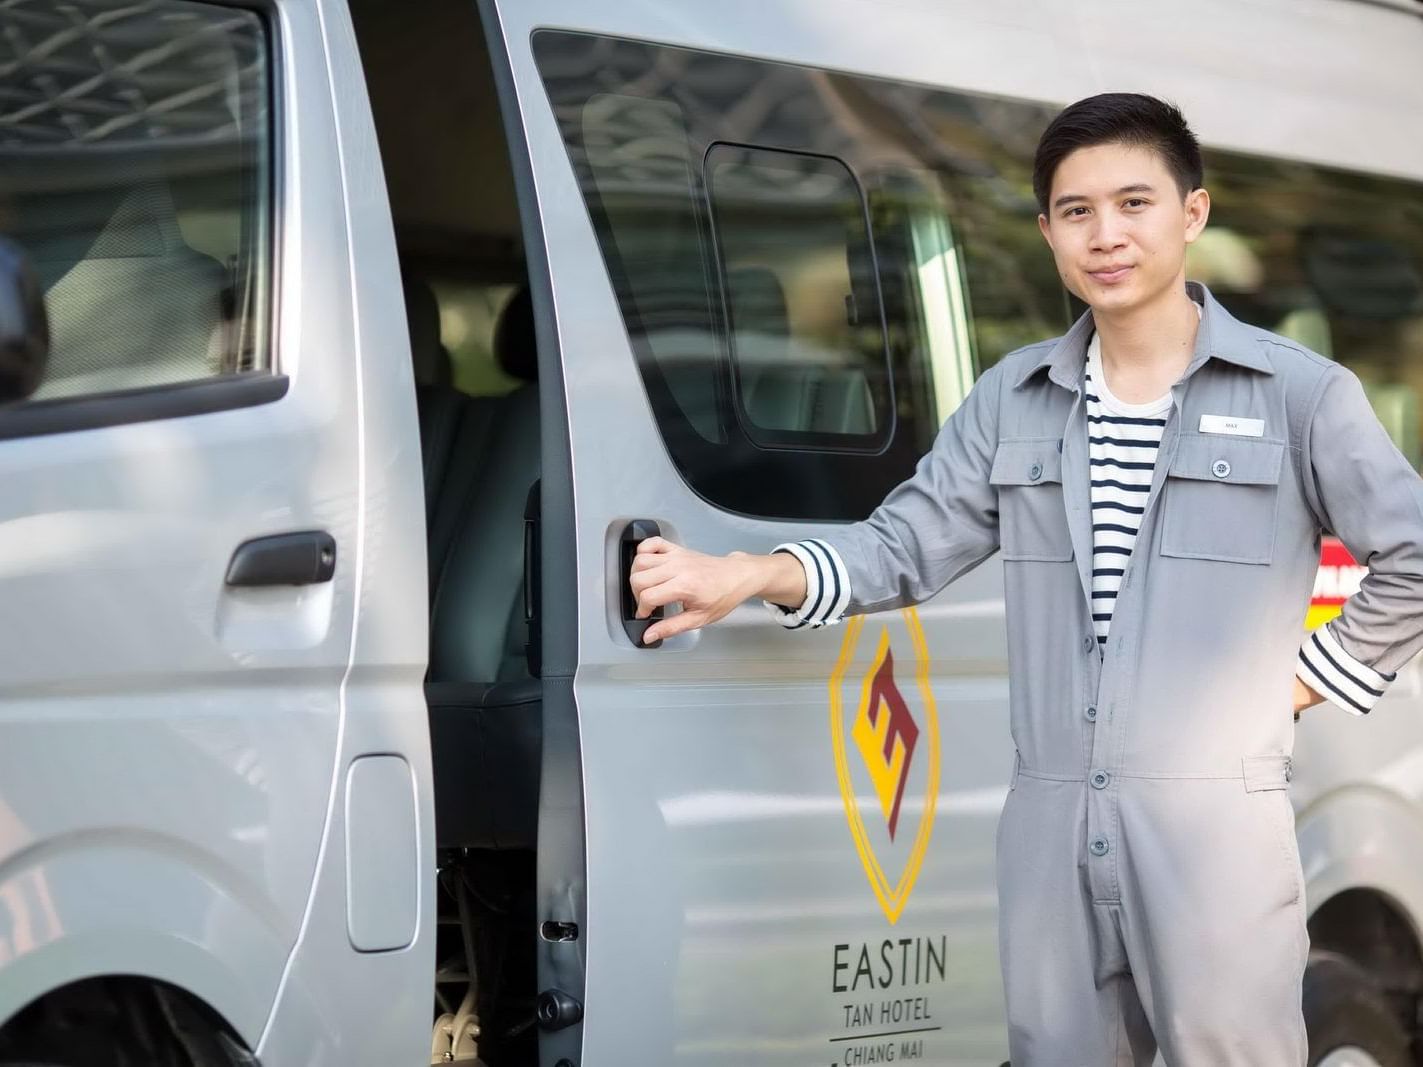 Man opening the door of a vehicle at Eastin Hotel